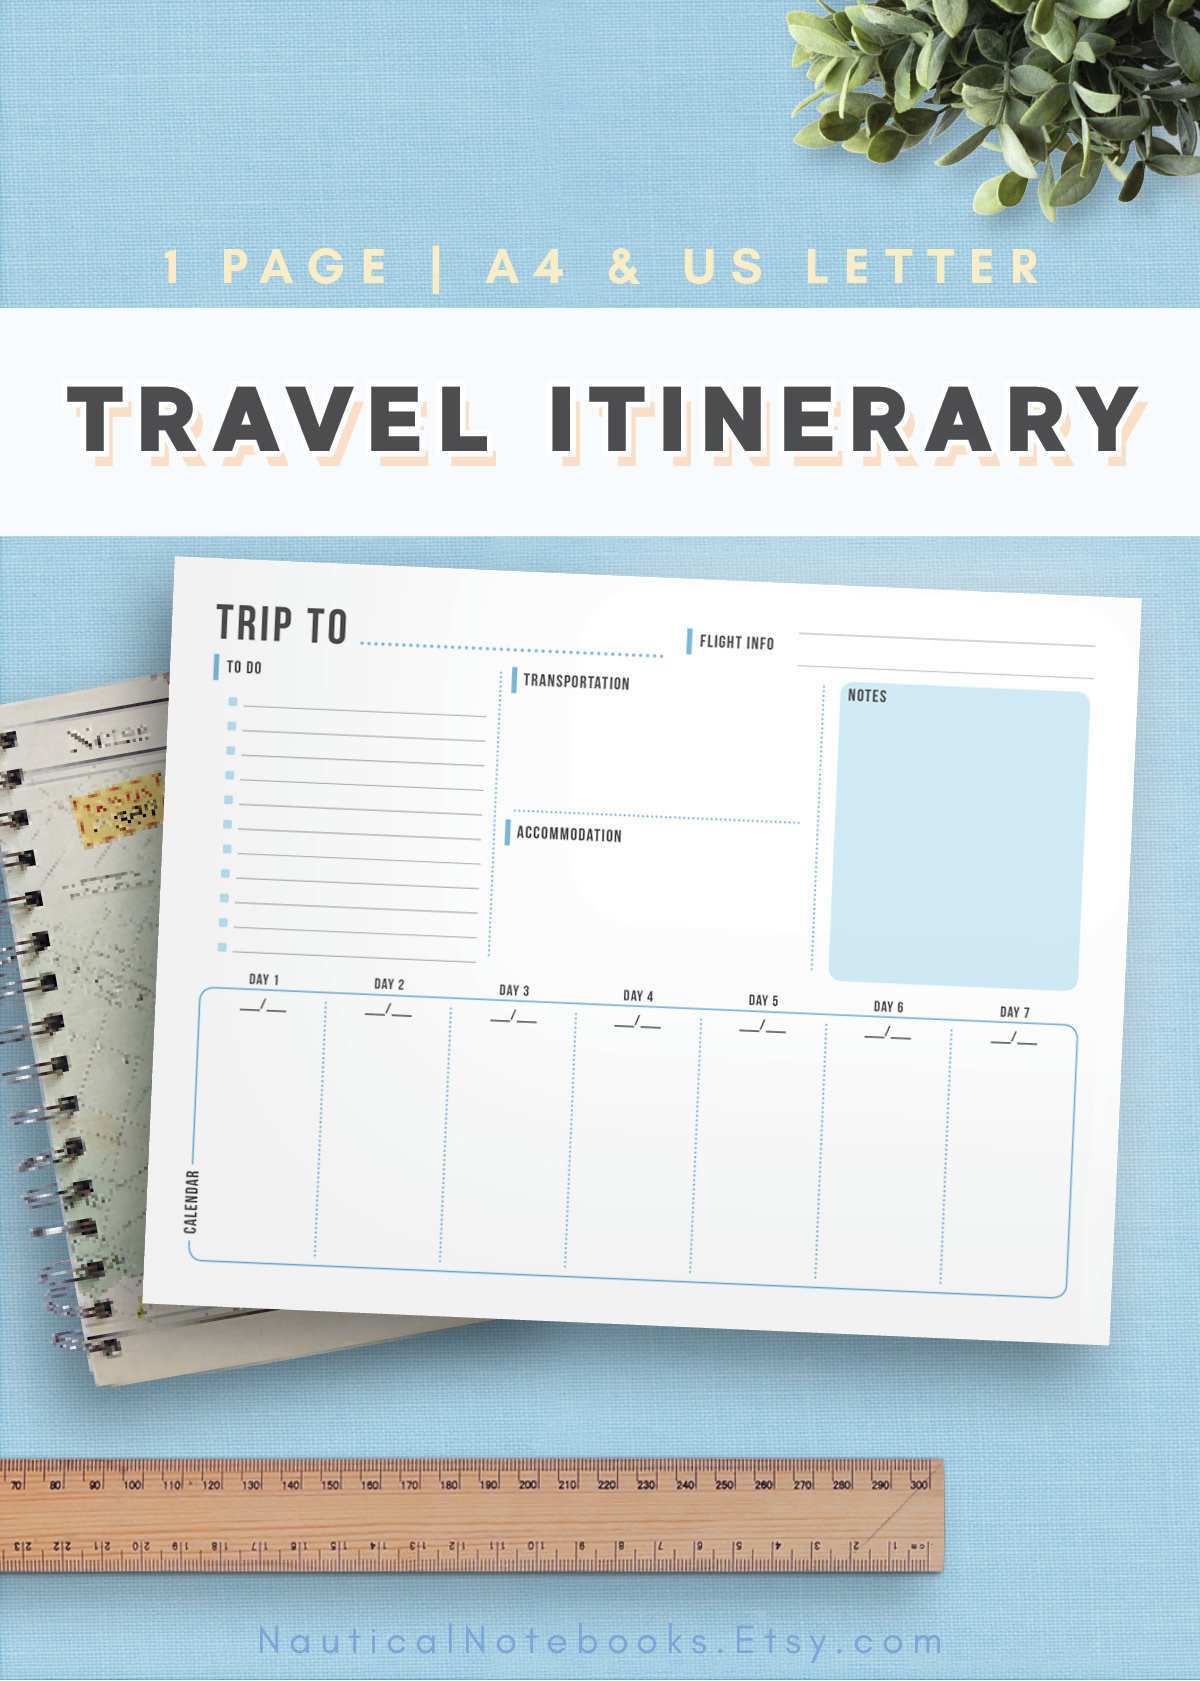 33 Report Travel Itinerary Template With Calendar PSD File by Travel Itinerary Template With Calendar